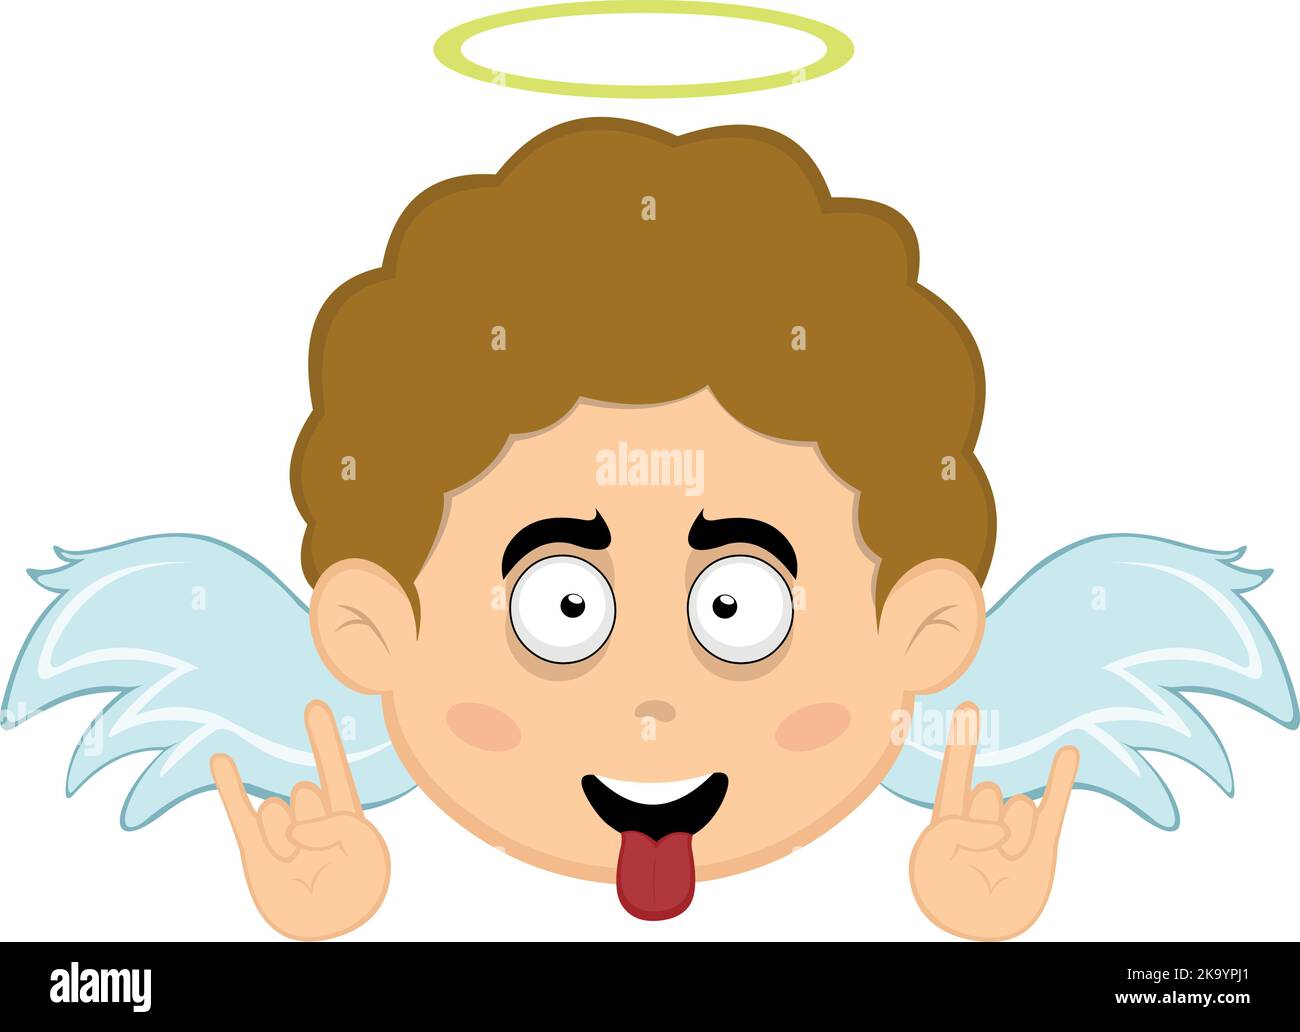 Vector illustration of the face of a cartoon angel boy with a happy expression, making the classic heavy metal gesture with his hands and tongue out Stock Vector